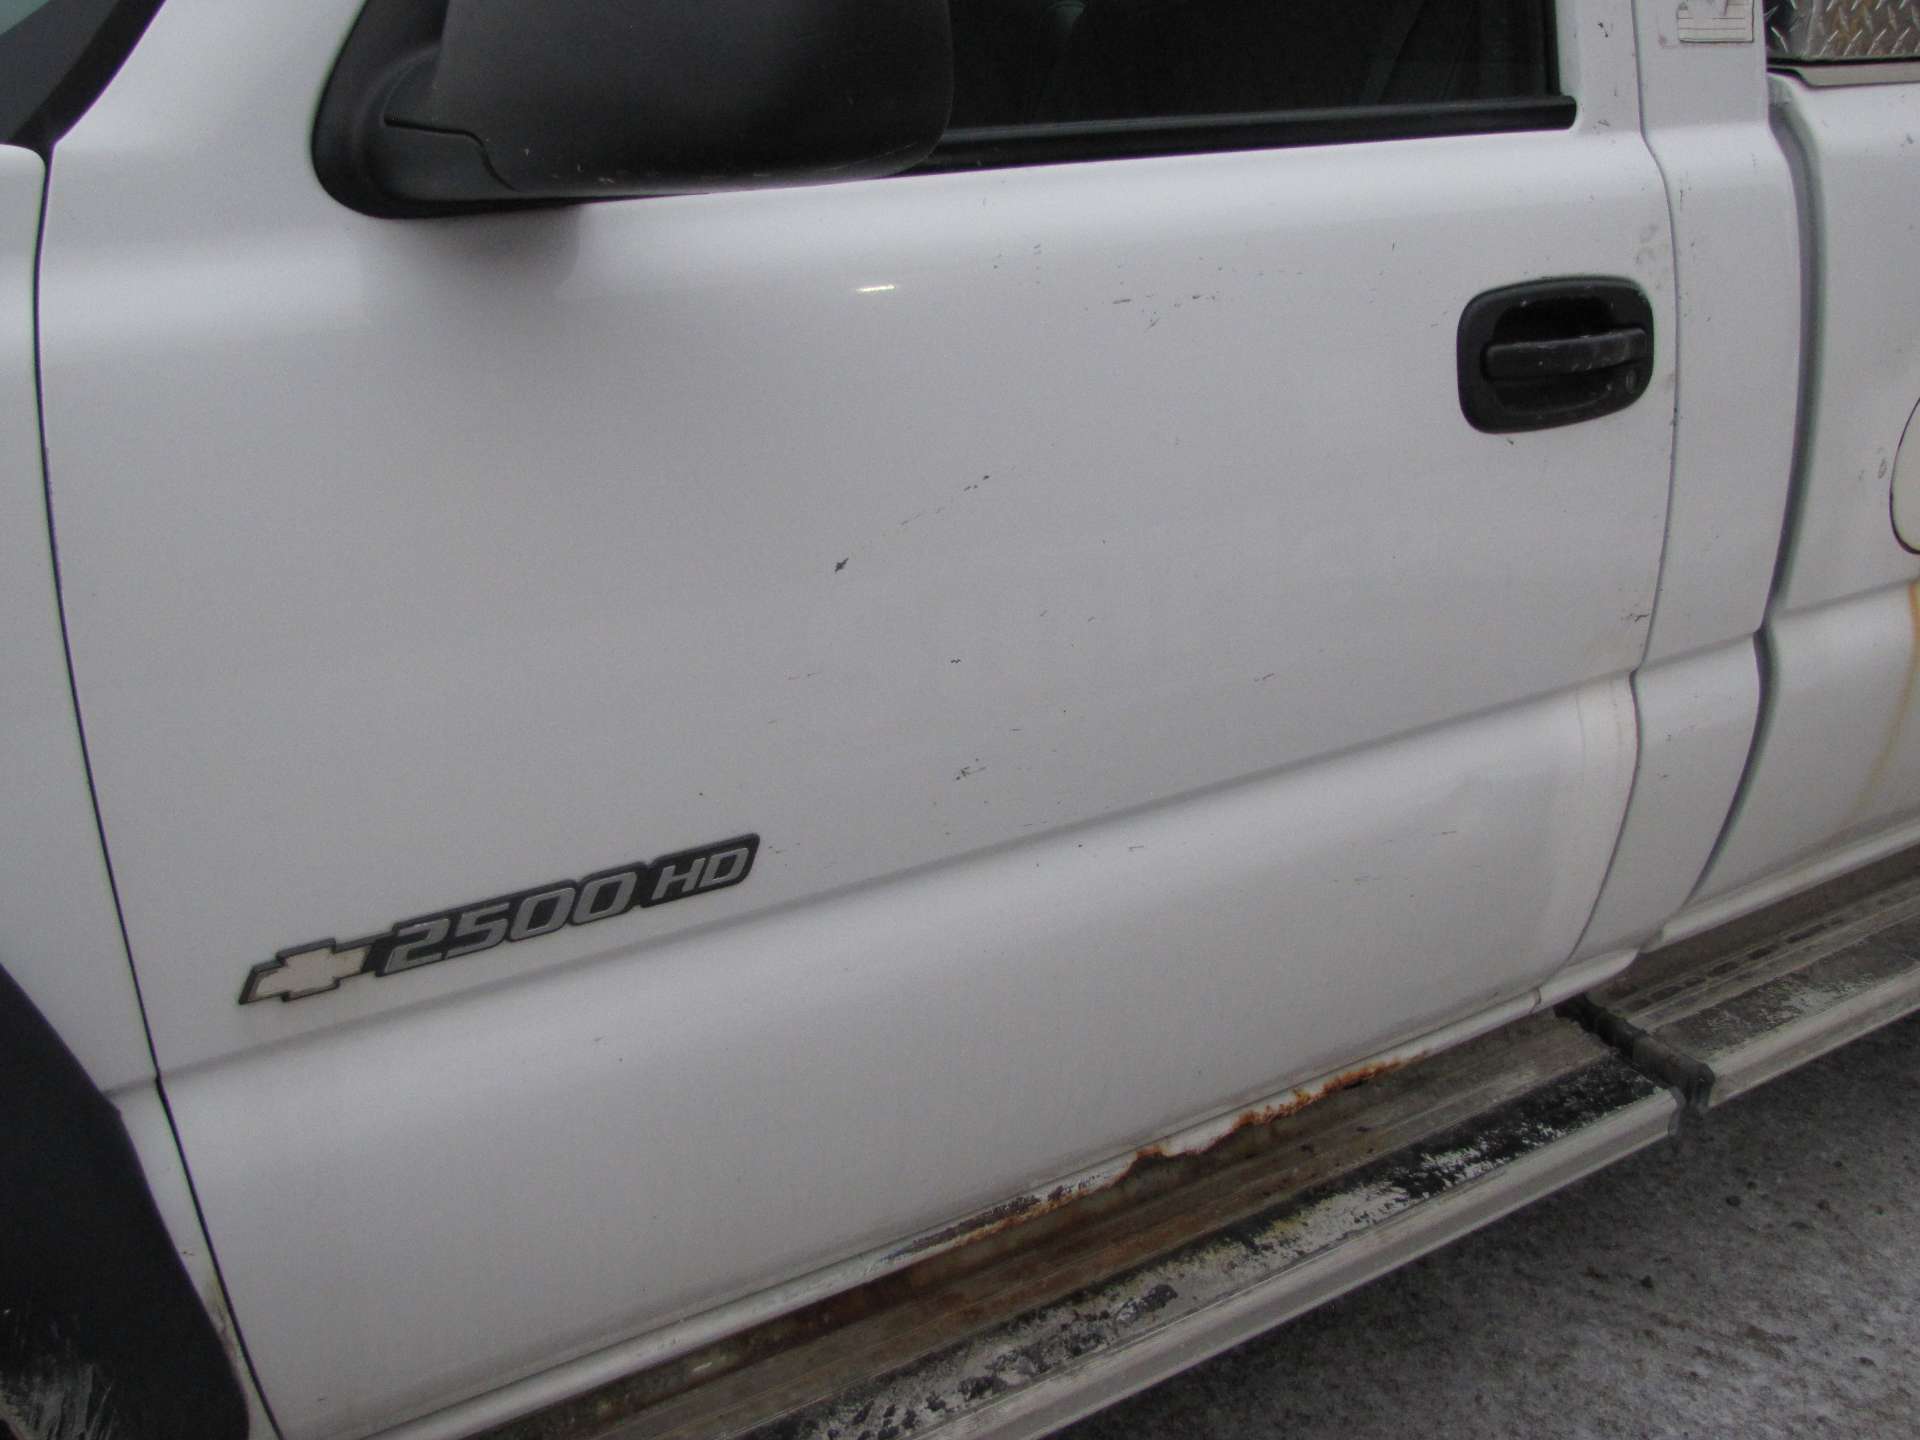 2006 Chevy 2500 HD pickup truck - Image 23 of 63